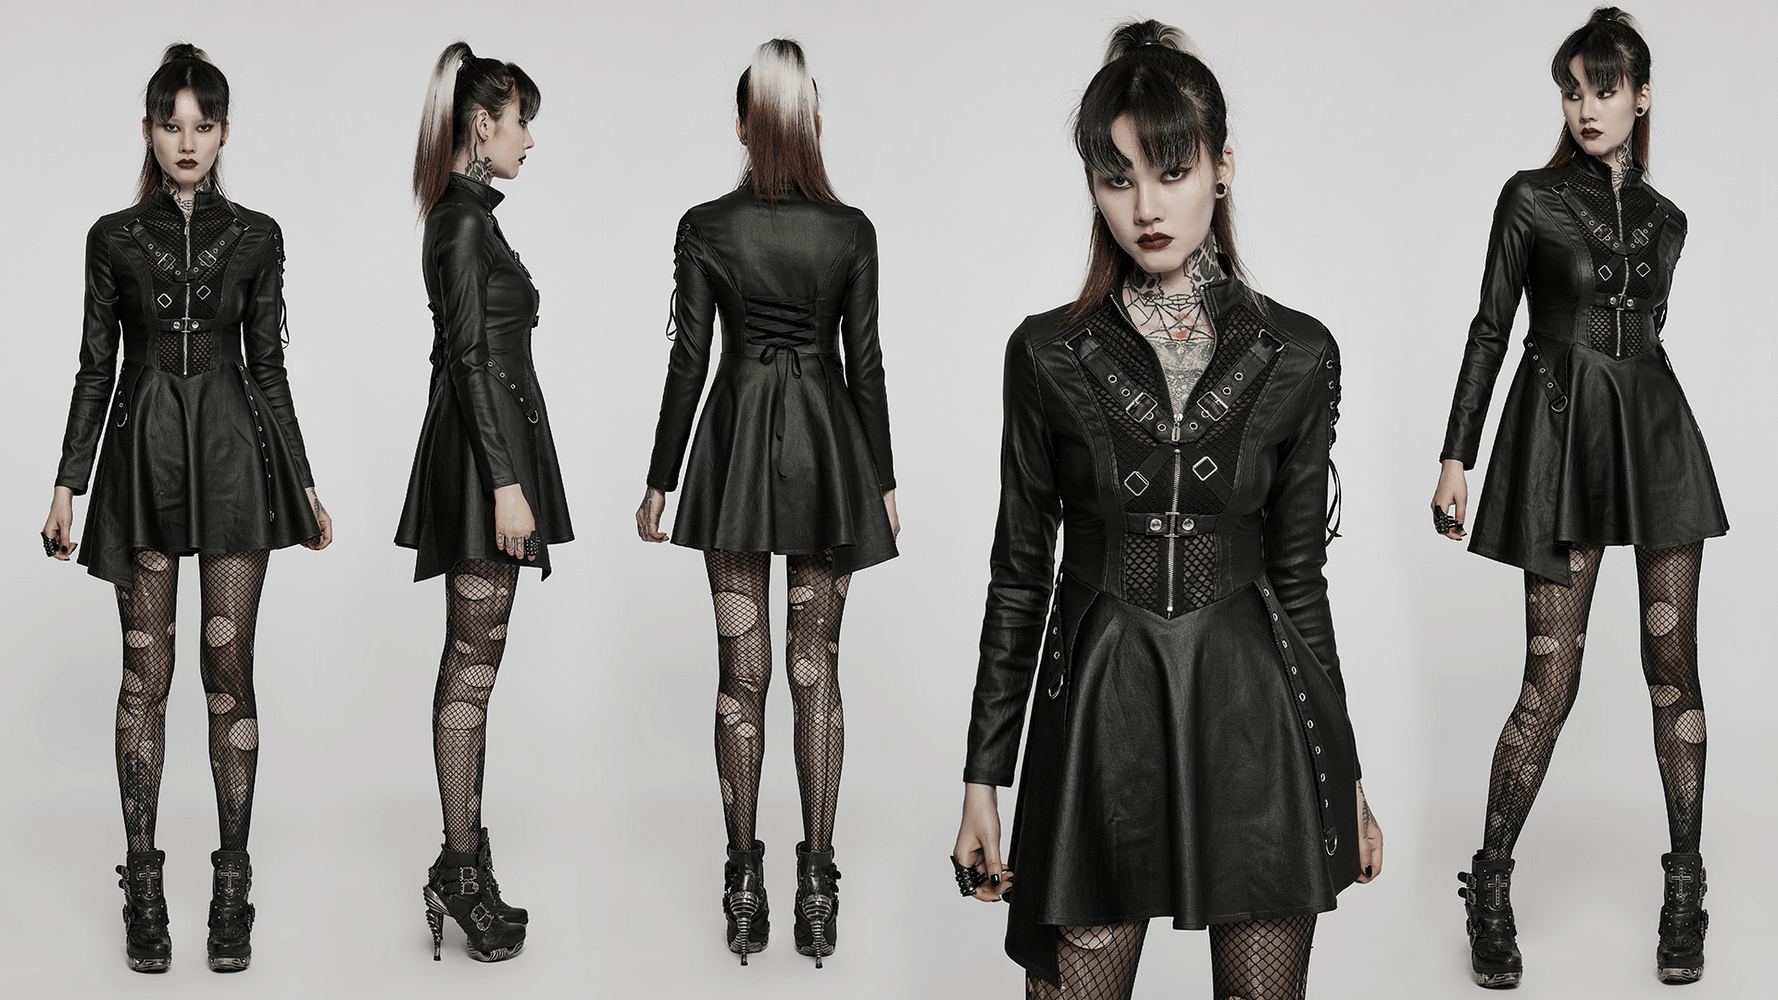 Gothic Asymmetric Hem Corset Style Dress With Lace-Up - HARD'N'HEAVY